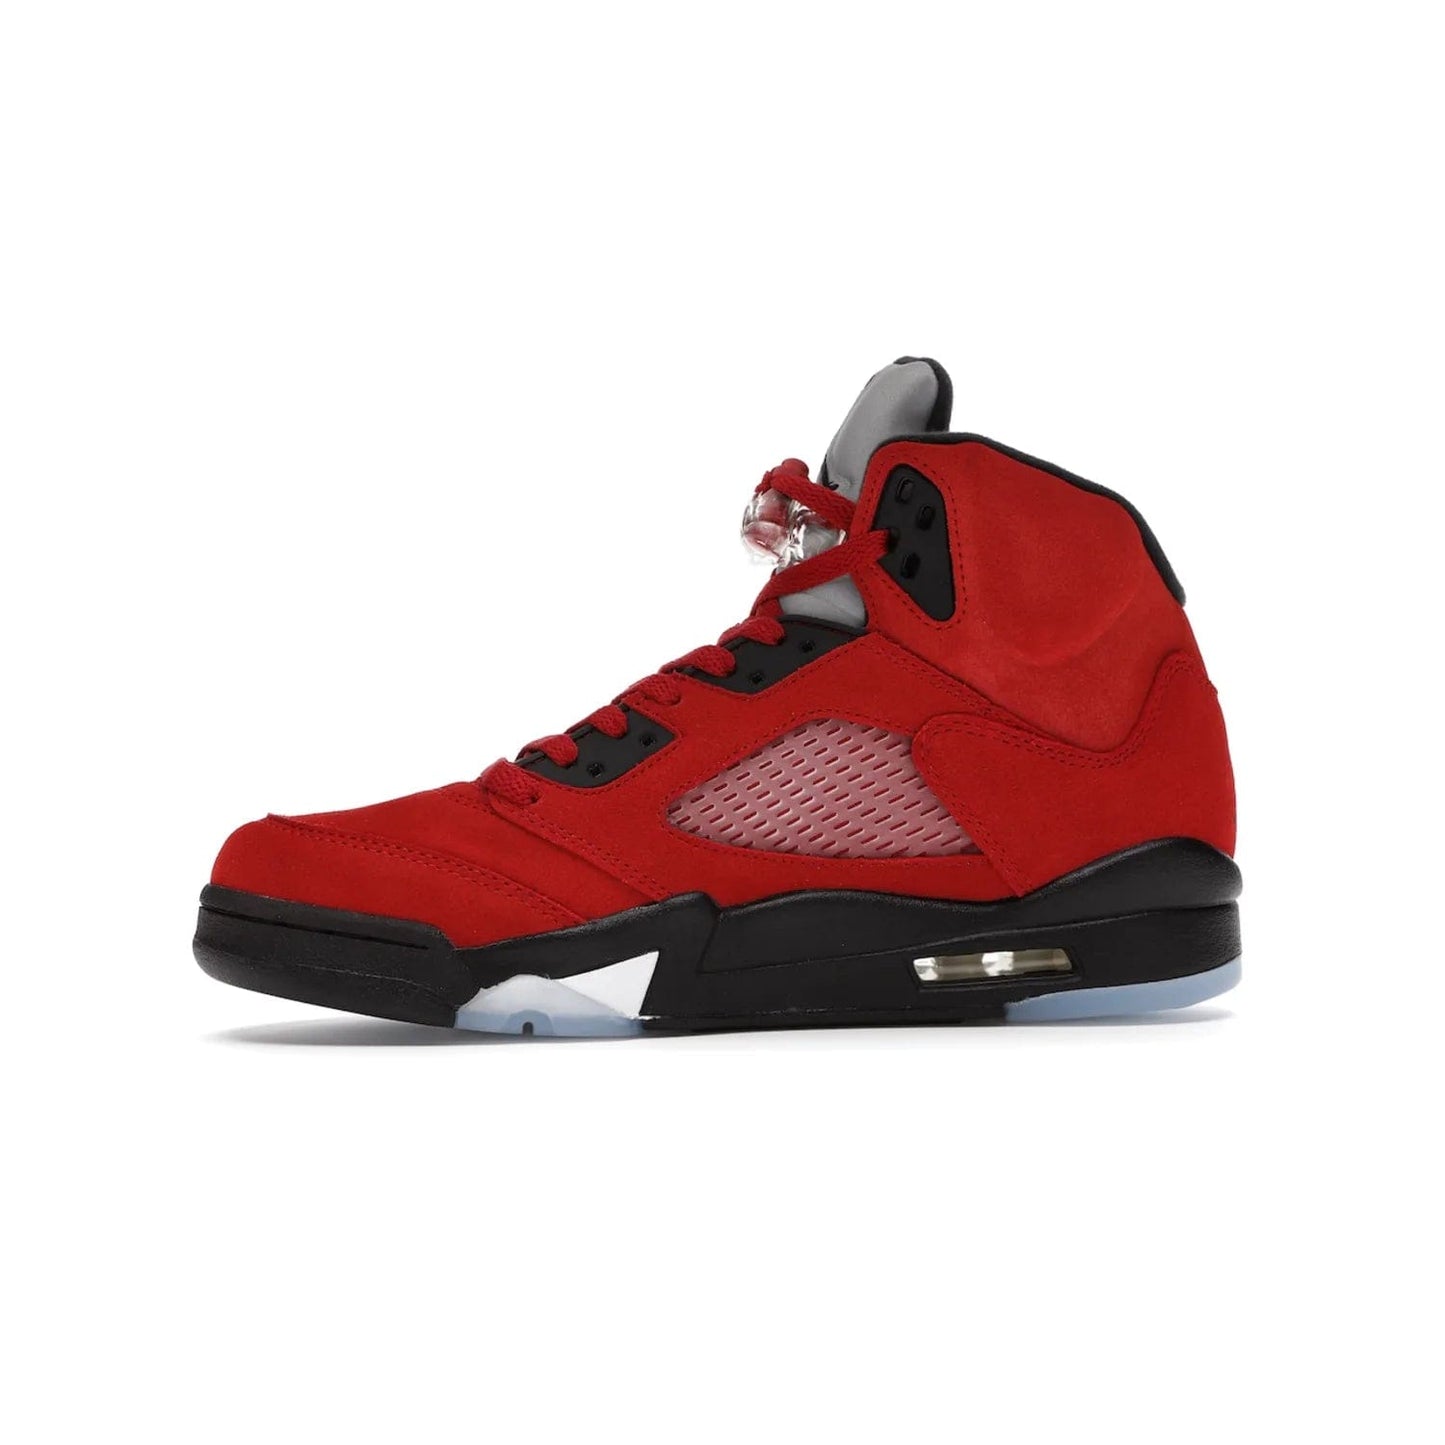 Jordan 5 Retro Raging Bull Red (2021) - Image 18 - Only at www.BallersClubKickz.com - Get ready for the 2021 stand-alone release of the Air Jordan 5 Raging Bulls! This all-suede upper combines luxe details like a Jumpman logo, red & black "23" embroidery and shark tooth detailing, atop a black midsole. Don't miss out - release date in April 2021 for $190.